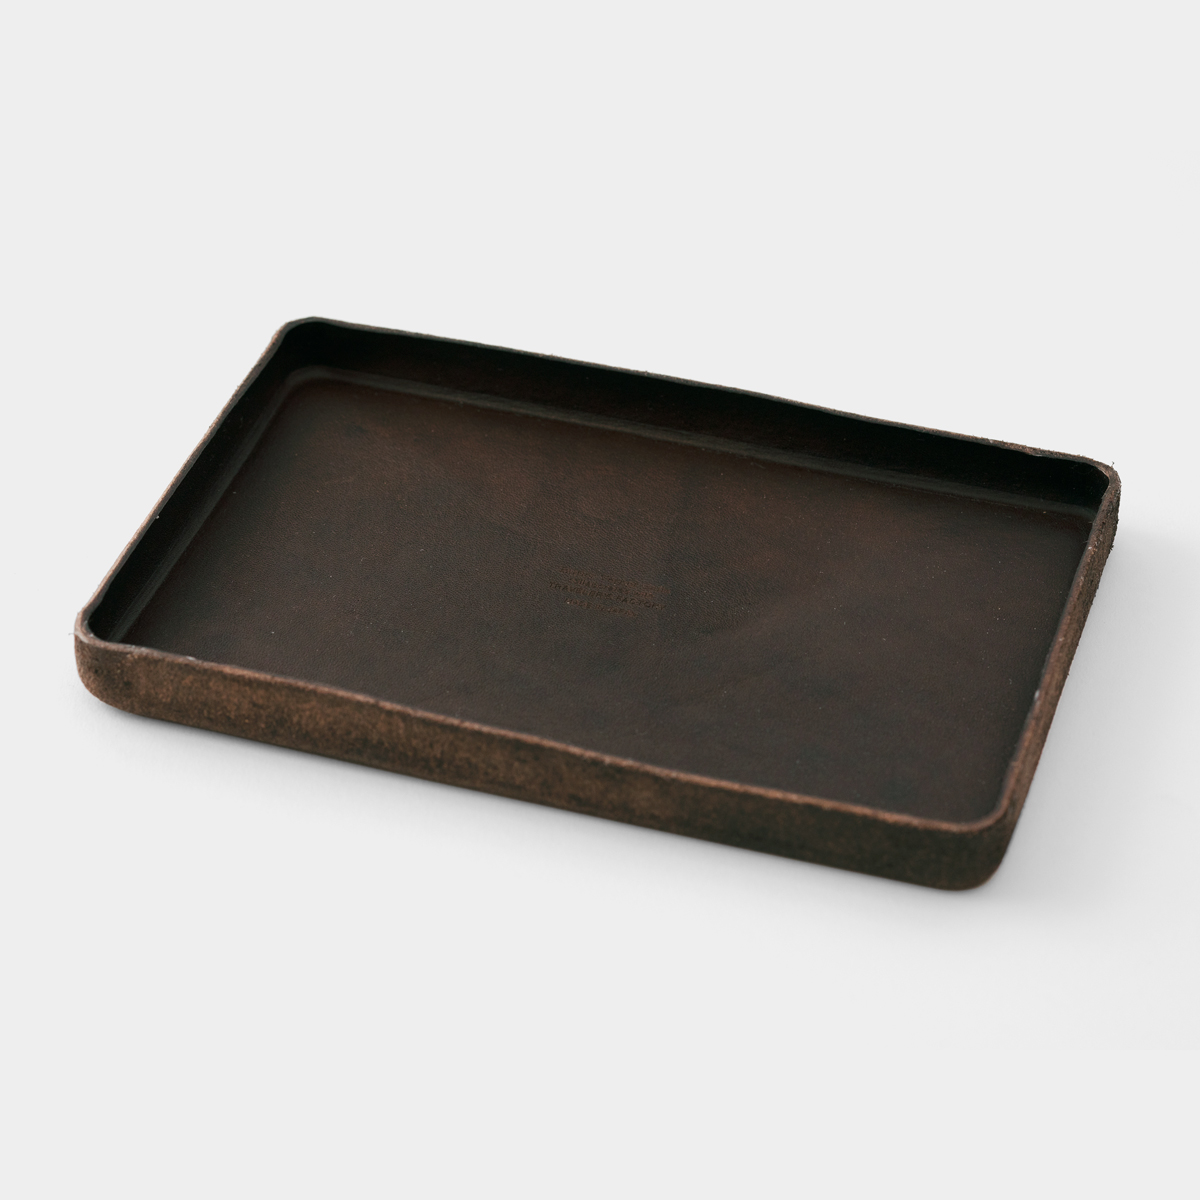 Traveler's Factory BVS Molded Leather Tray [07100-688] - Brown